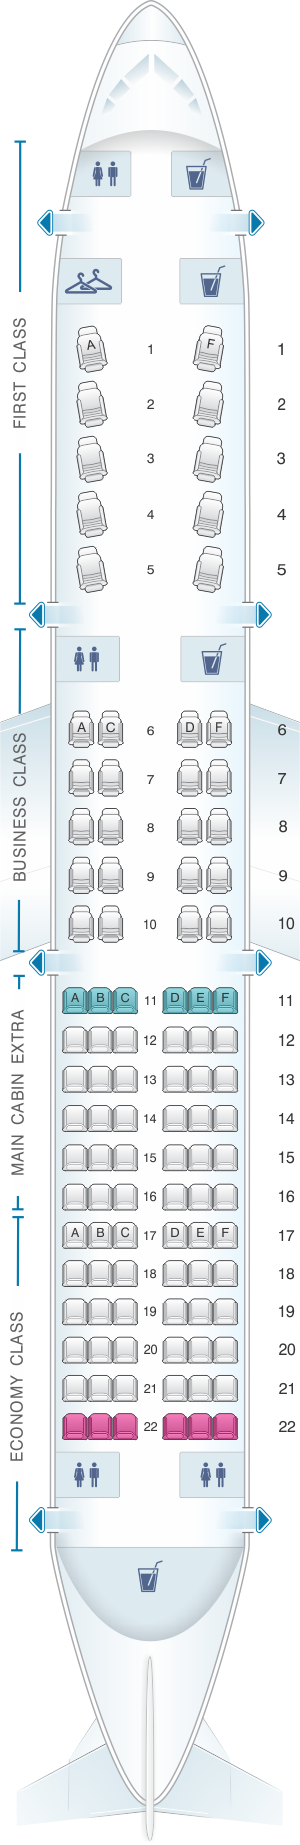 A321 Seating Chart